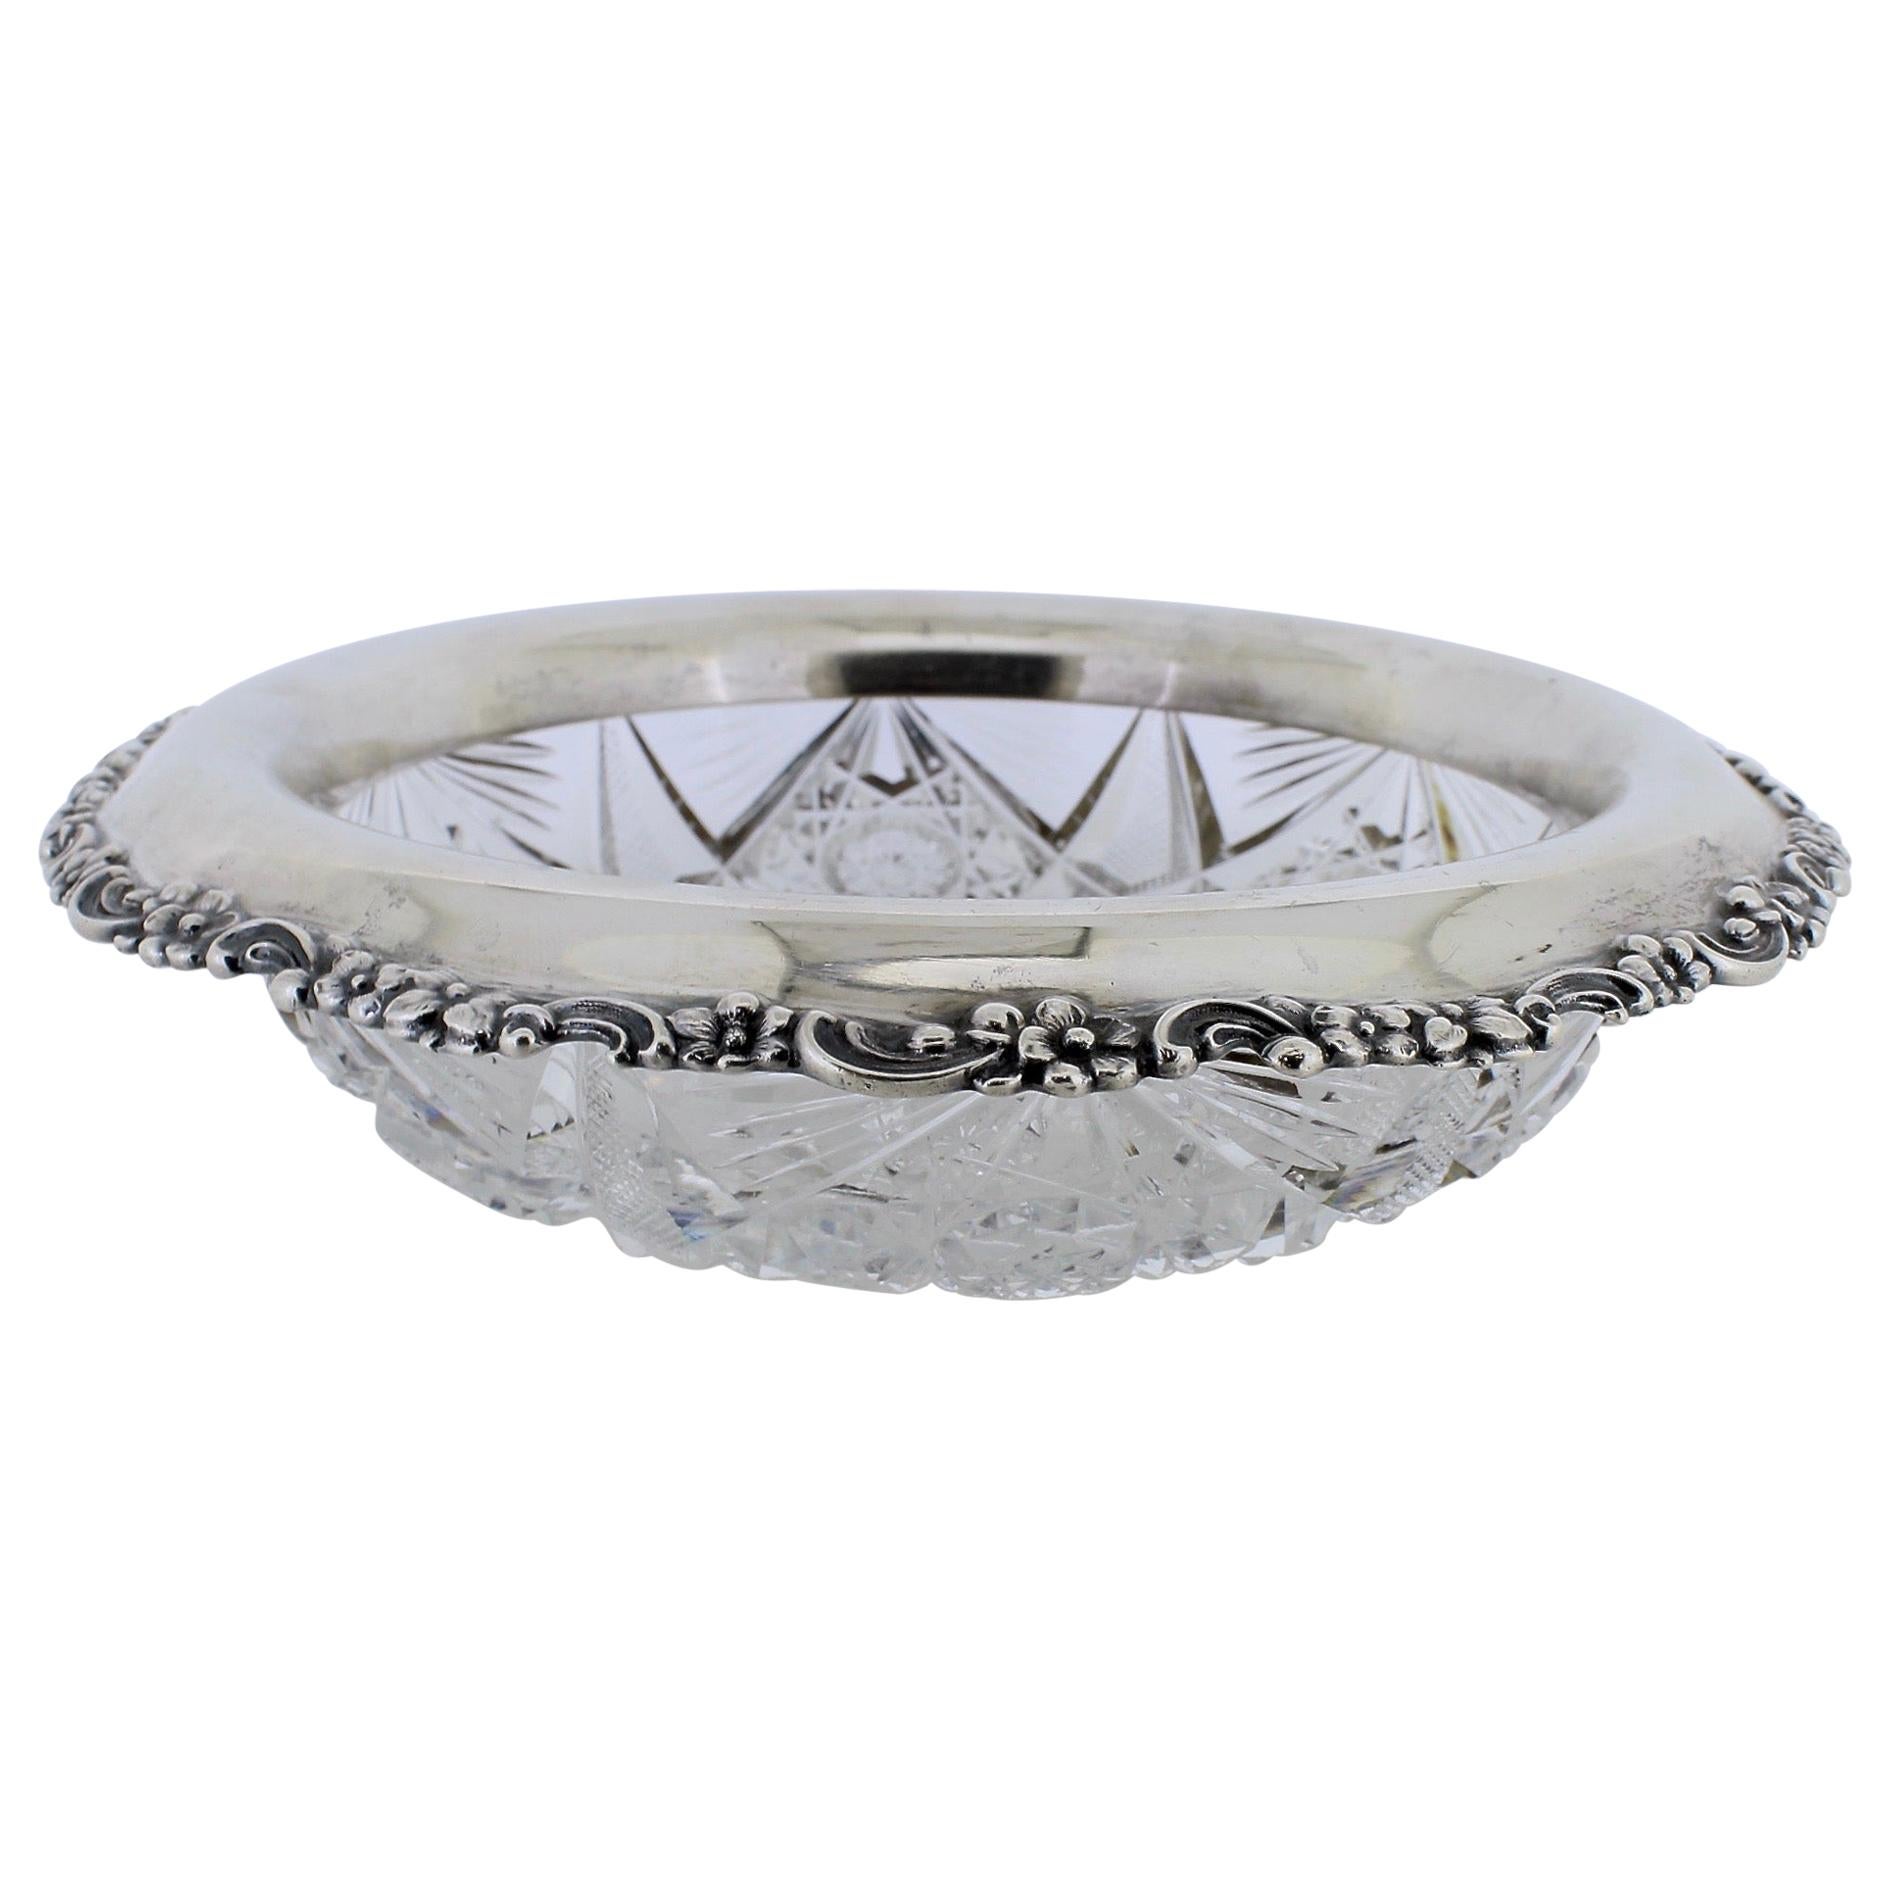 Antique Tiffany & Co. Sterling Silver Mounted Cut Glass Bowl